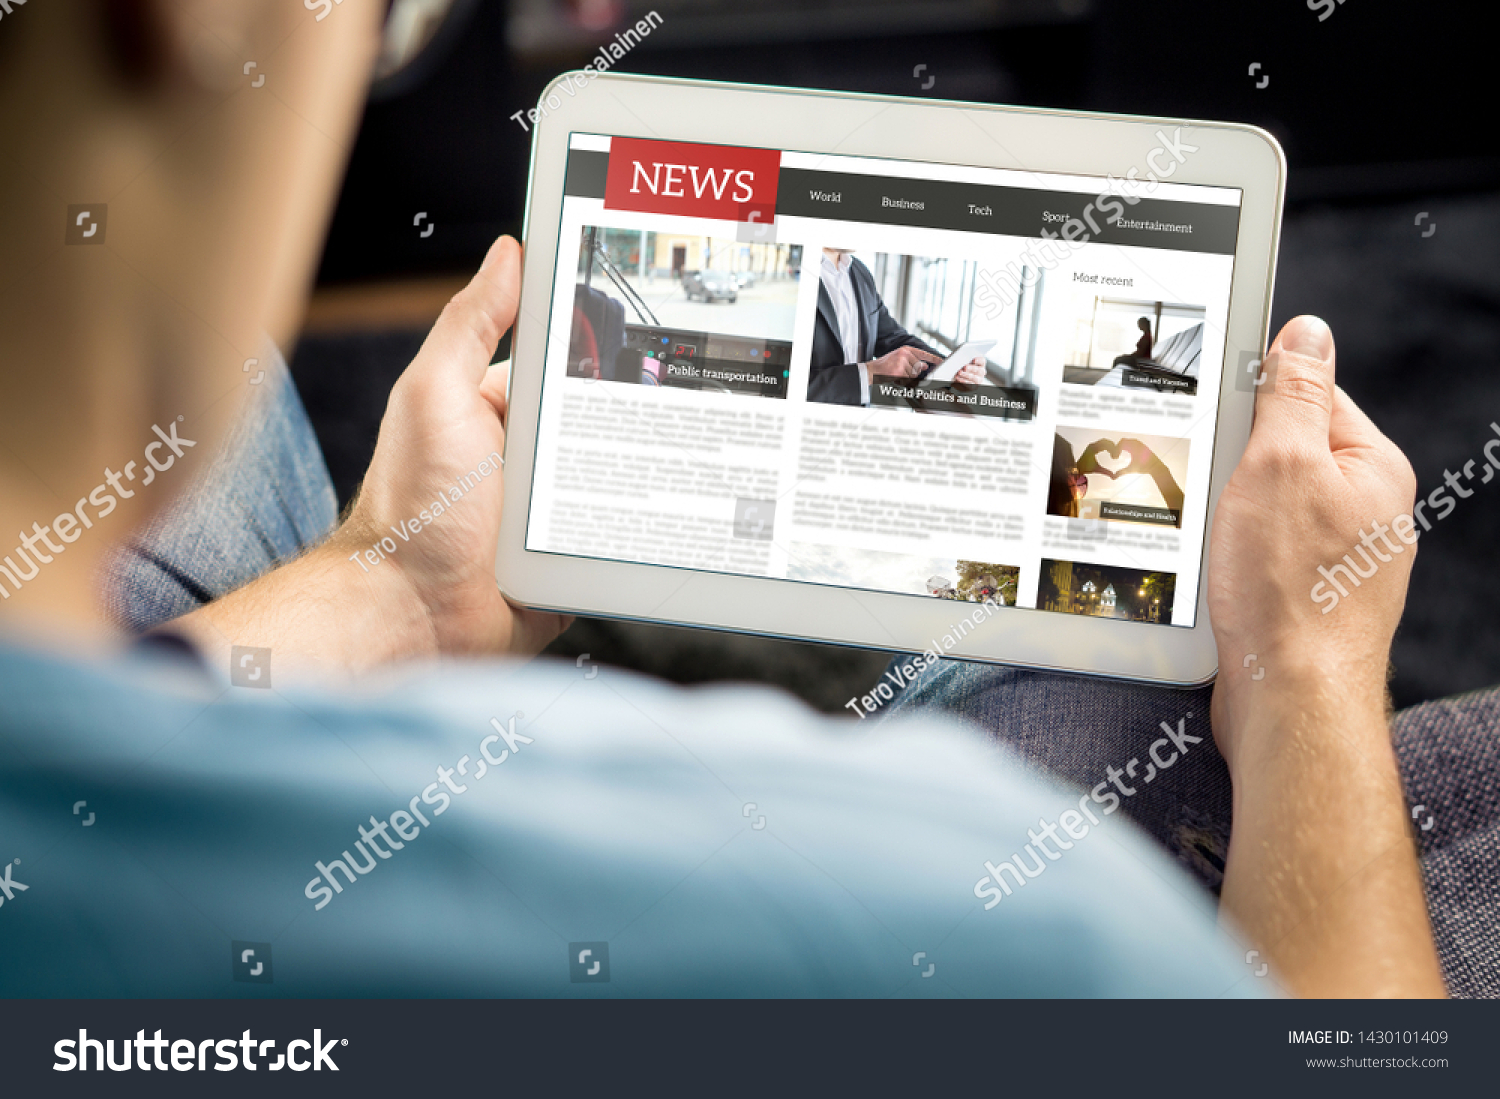 Online news article on tablet screen. Electronic newspaper or magazine. Latest daily press and media. Mockup of digital portal and website. Happy person using web service in the morning. Reading text. #1430101409